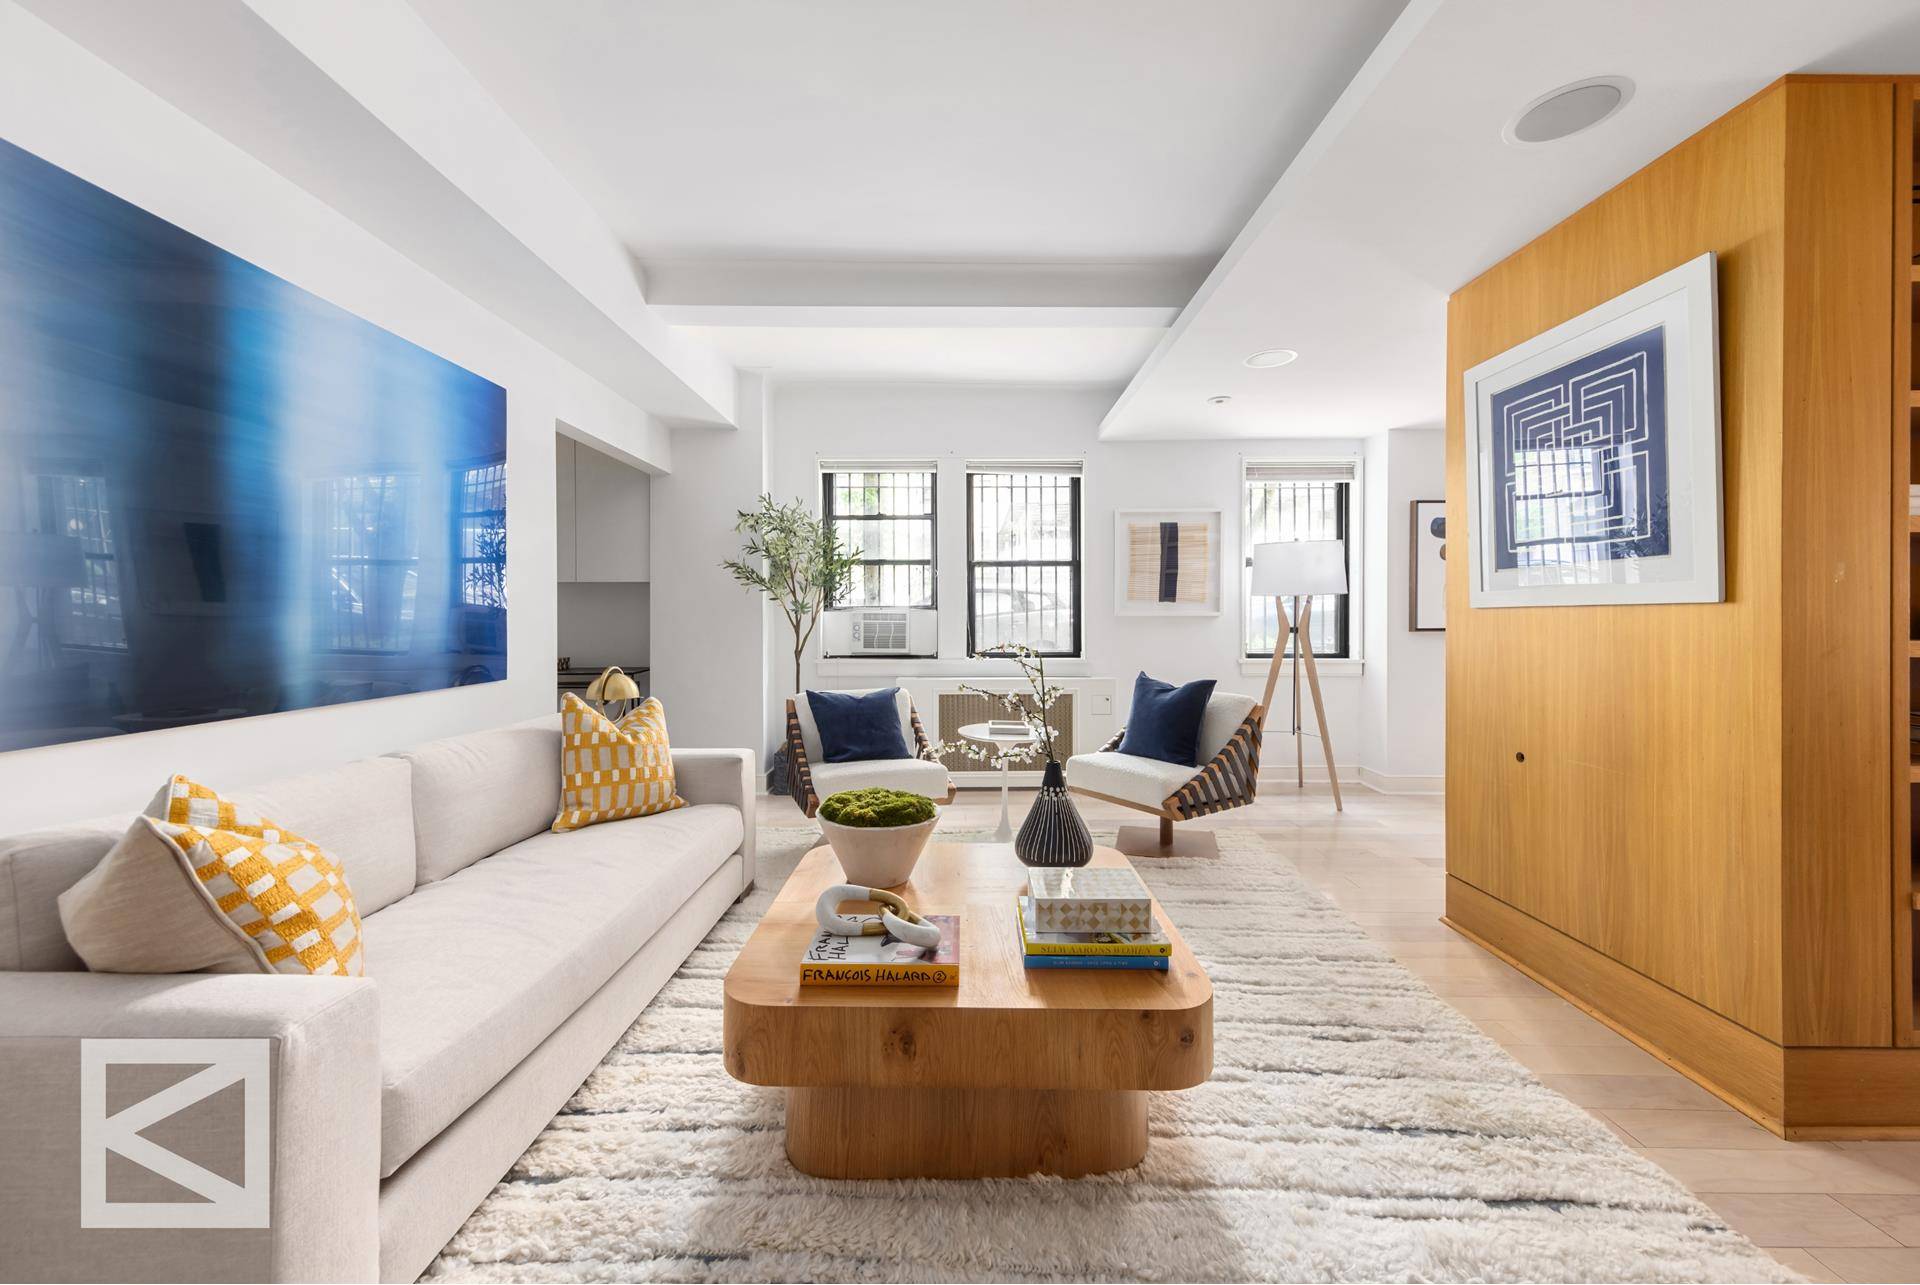 Located on one of the best blocks of the Upper West Side, this expansive and fully renovated classic seven room residence is meticulously situated in a coveted Emery Roth building.